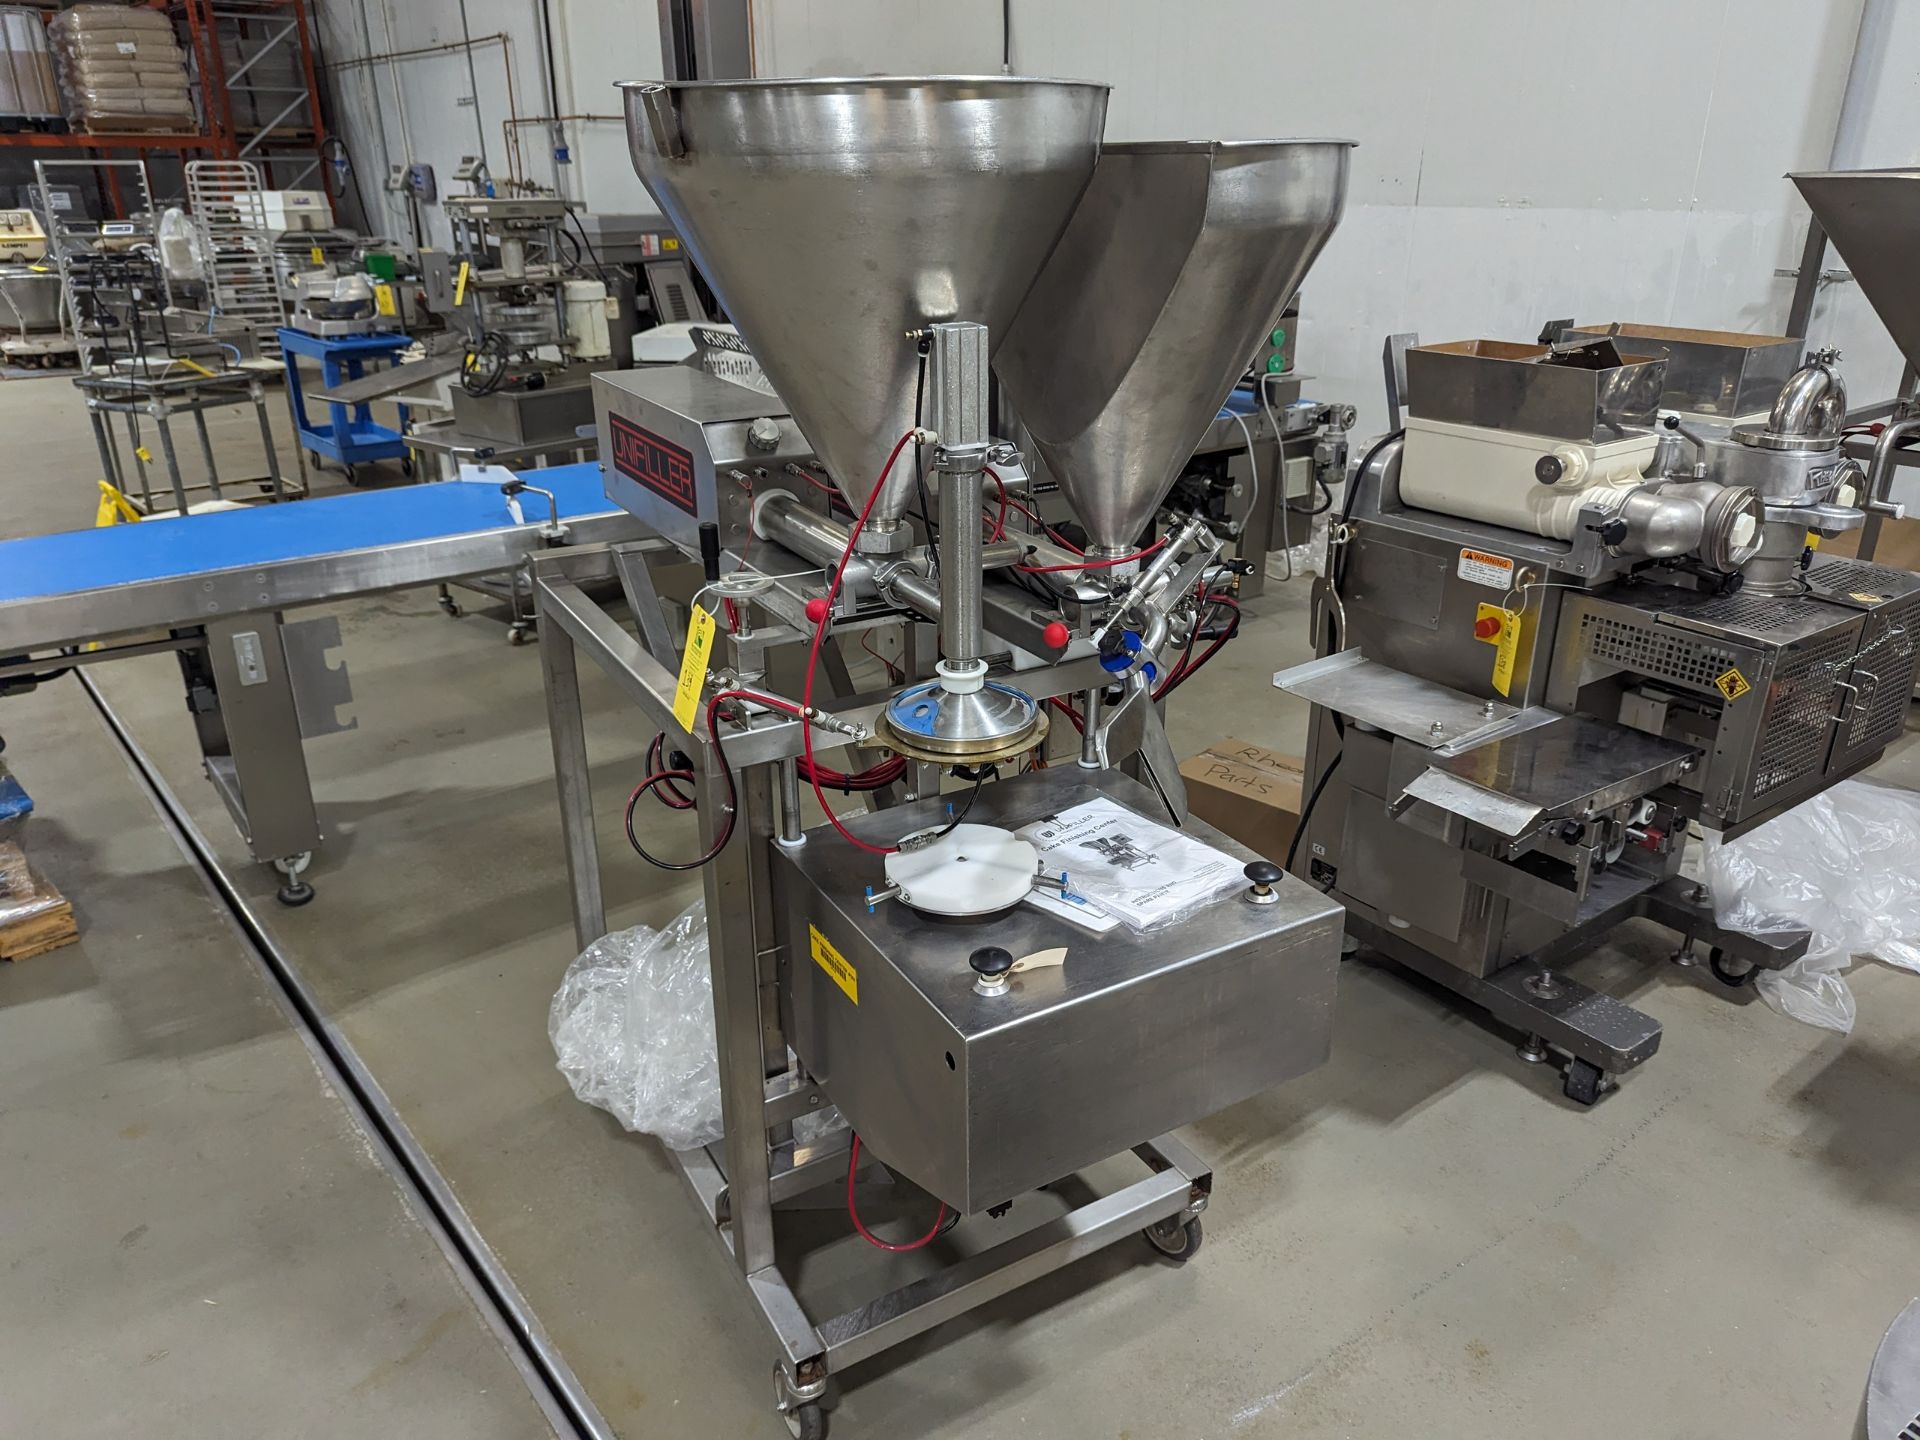 Unifiller CFC Cake Finishing Center, Dimensions LxWxH: 60x36x73 - Image 2 of 7